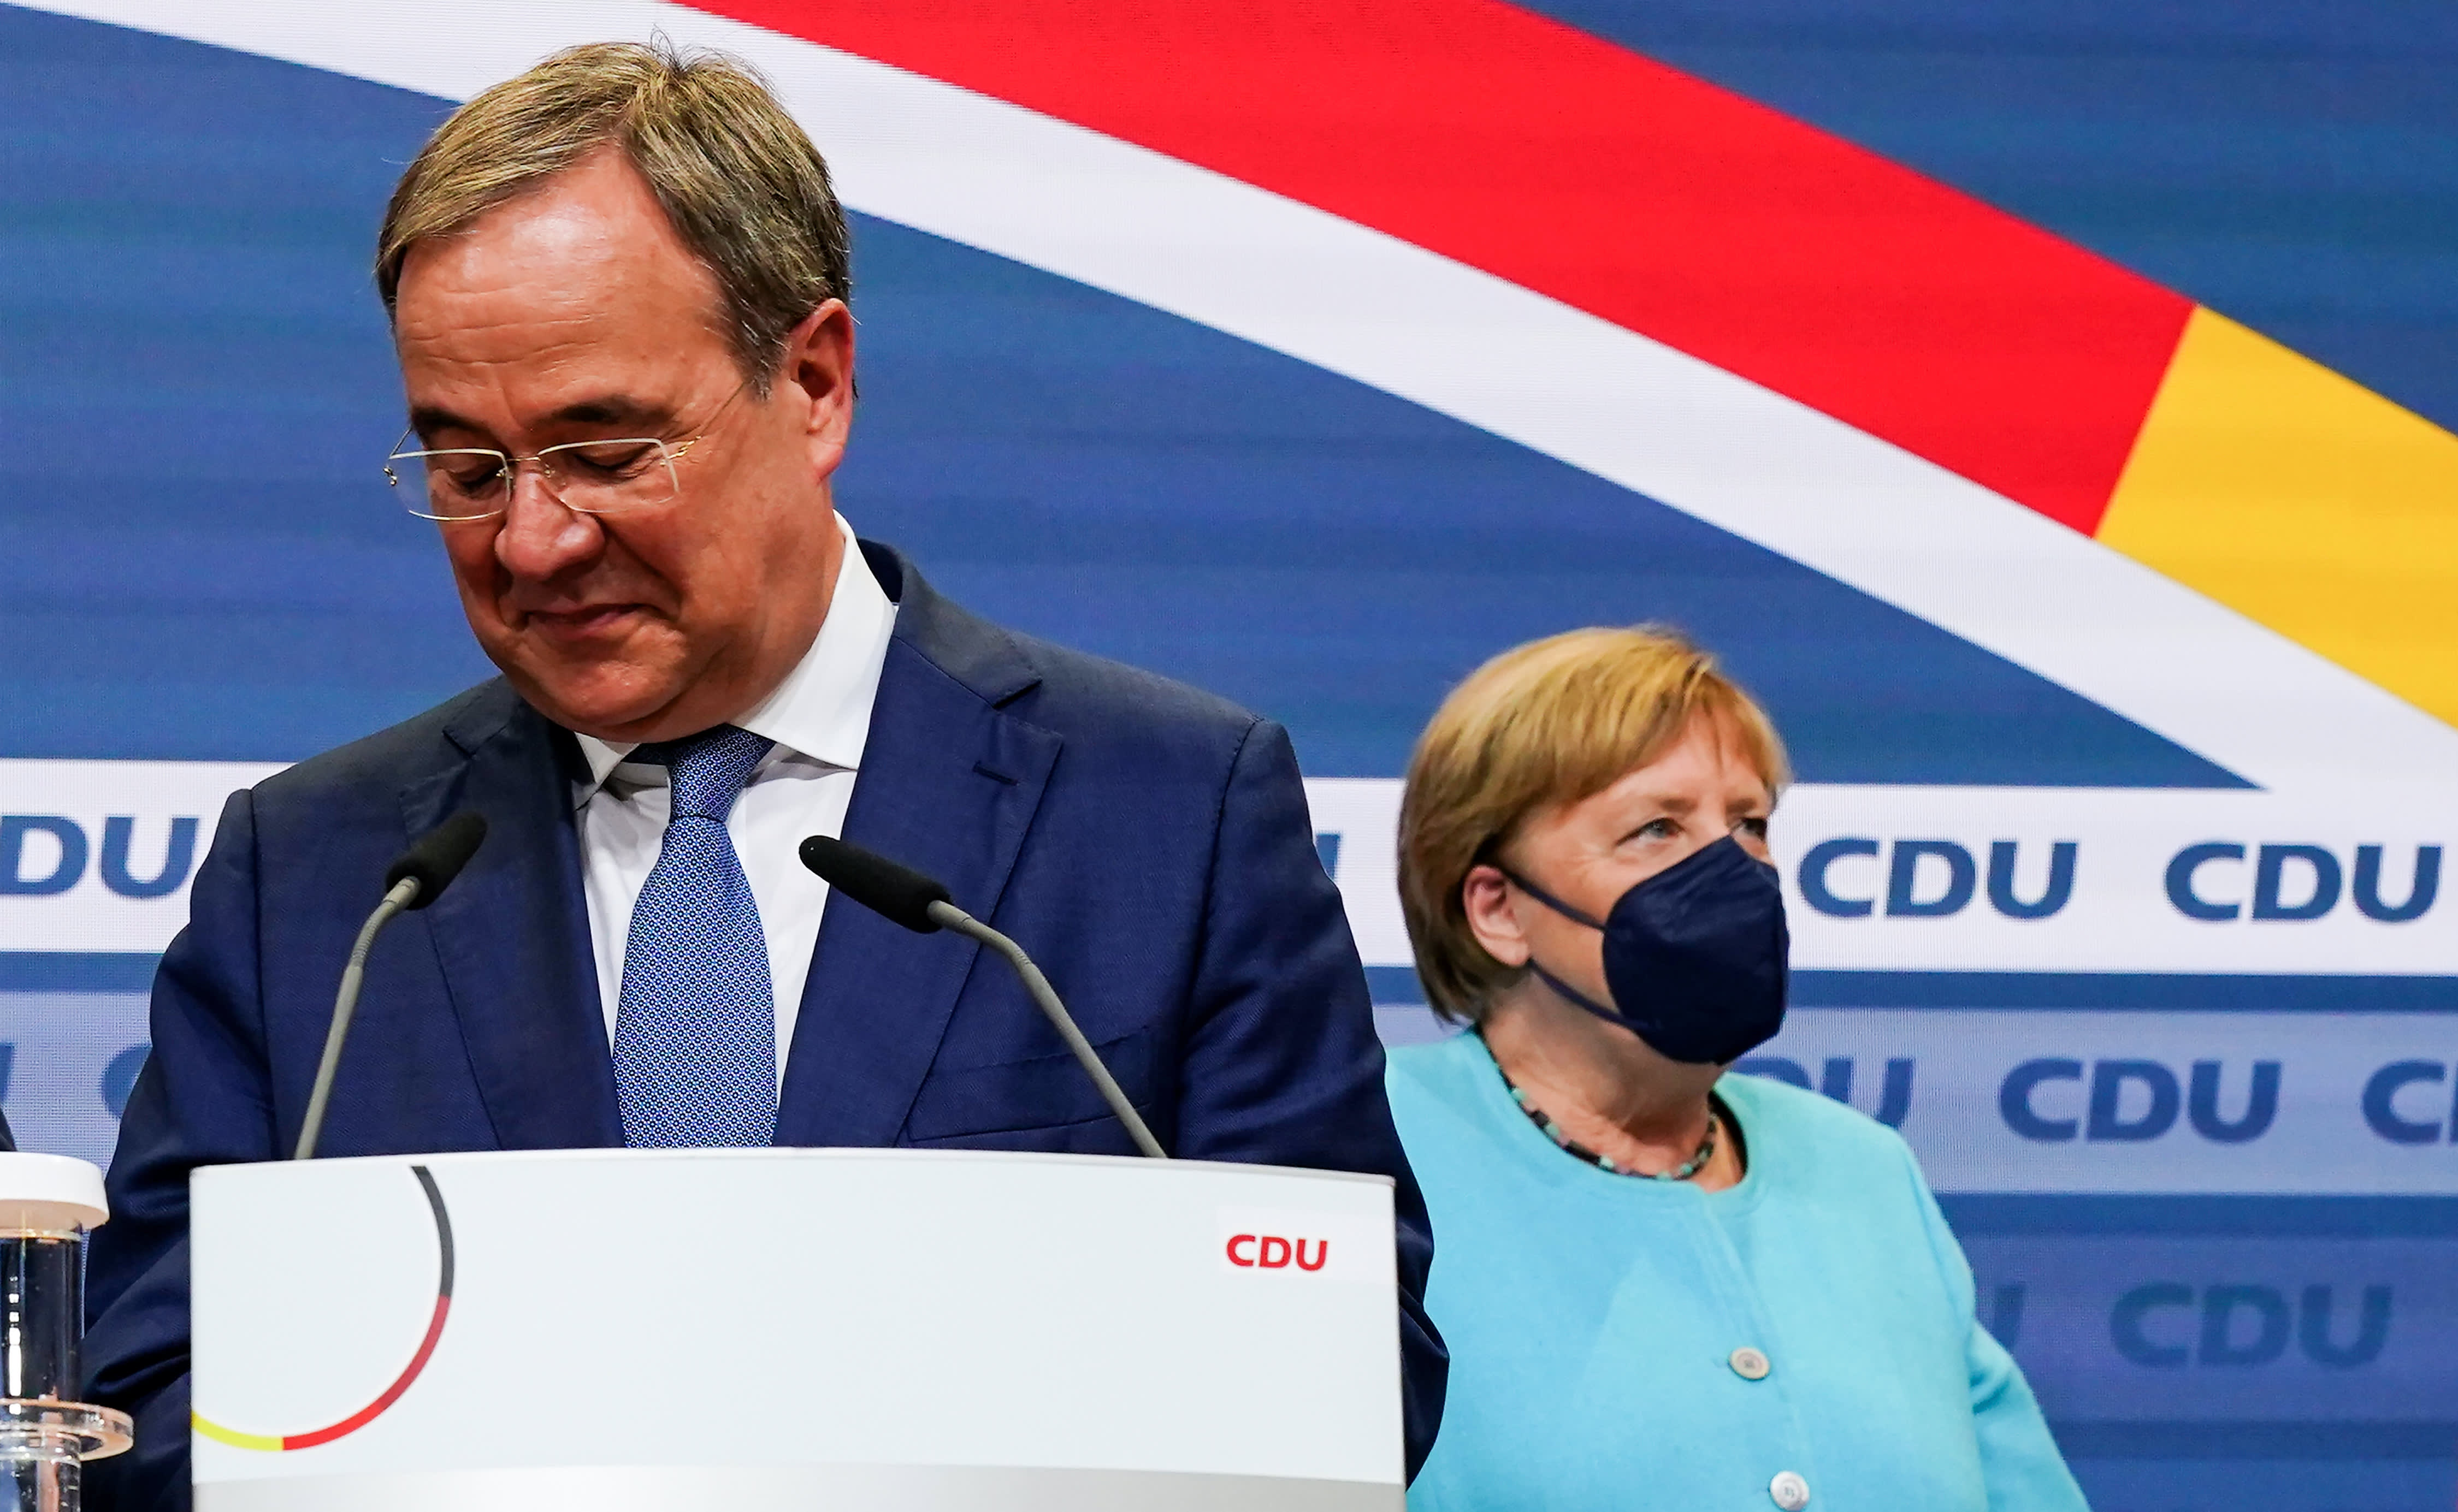 ‘We lost the election. Period’: Pressure mounts on Merkel’s conservatives after worst-ever result – CNBC